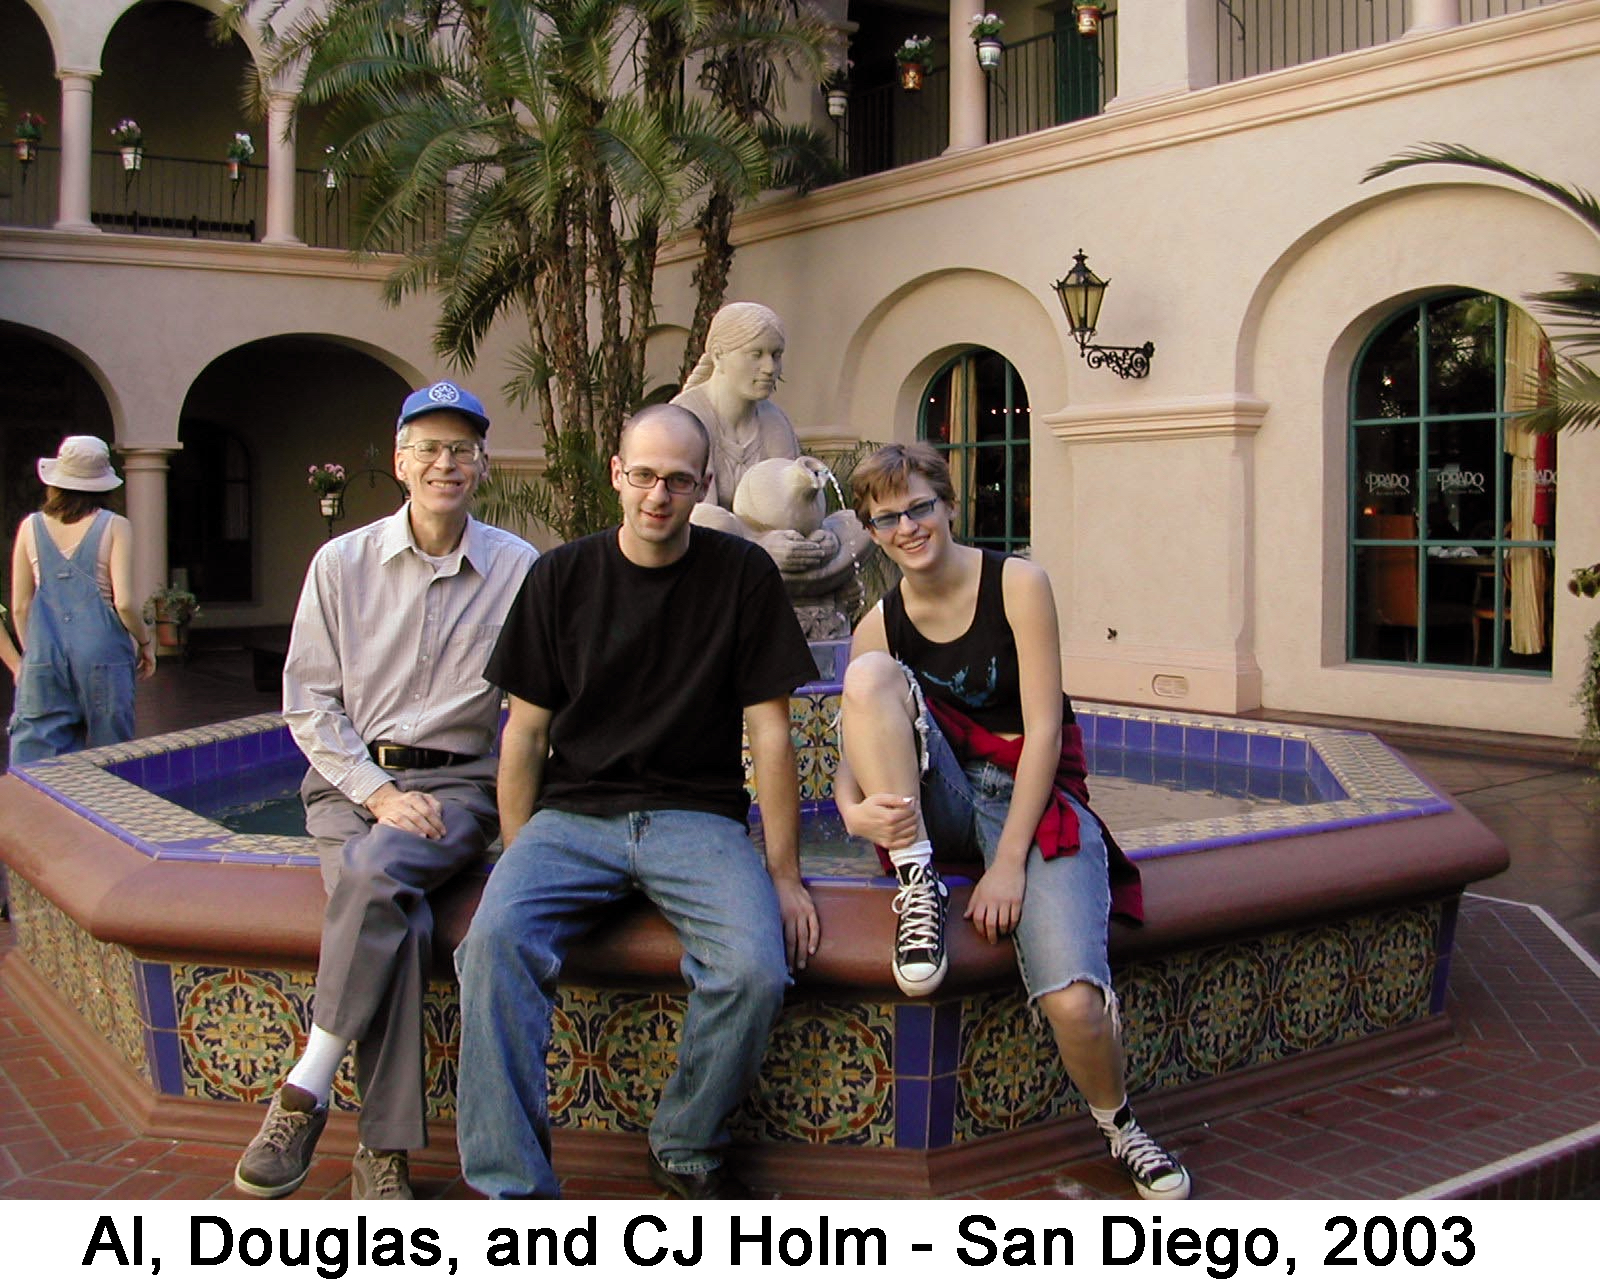 Al, Douglas, and CJ Holm sitting on a fountain at Balboa Park in San Diego.